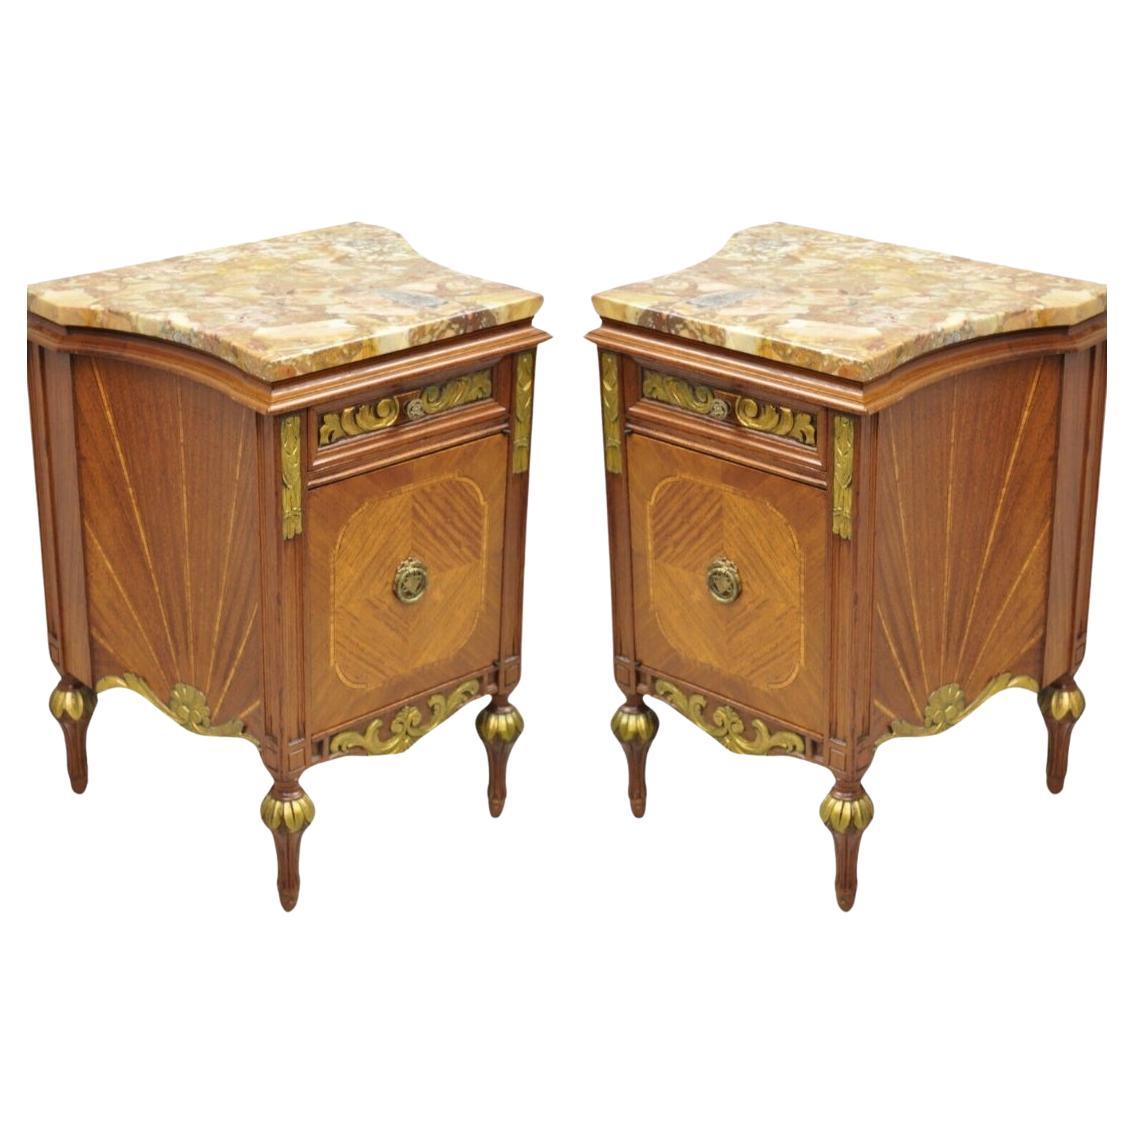 French Louis XVI Style Marble Top Satinwood Inlay Mahogany Nightstands - a Pair For Sale